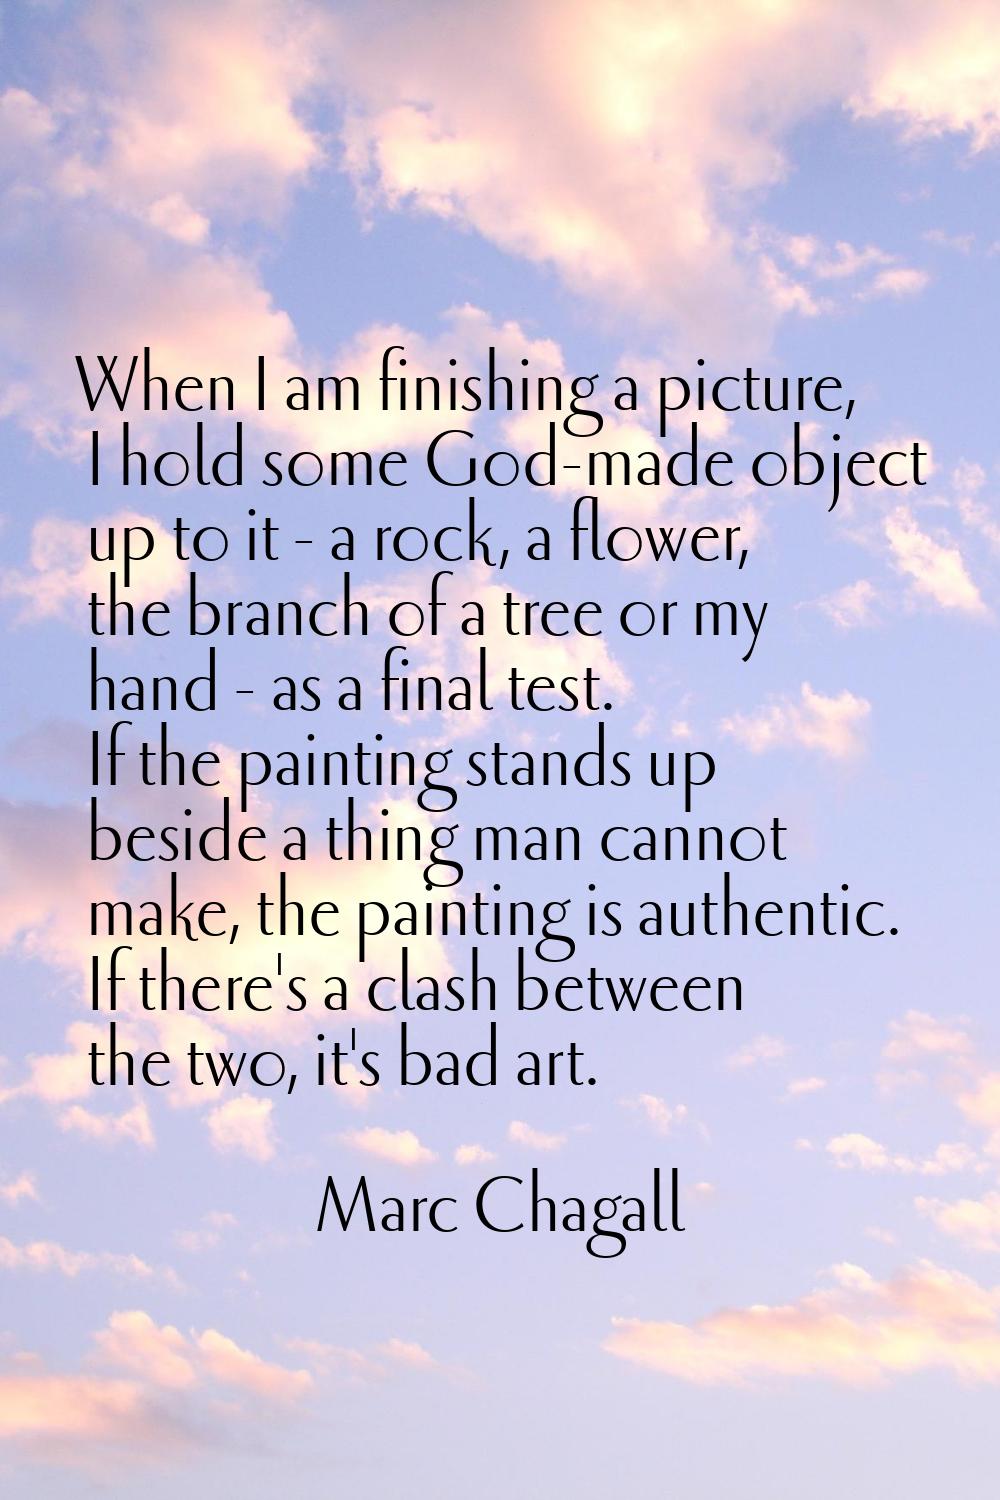 When I am finishing a picture, I hold some God-made object up to it - a rock, a flower, the branch 